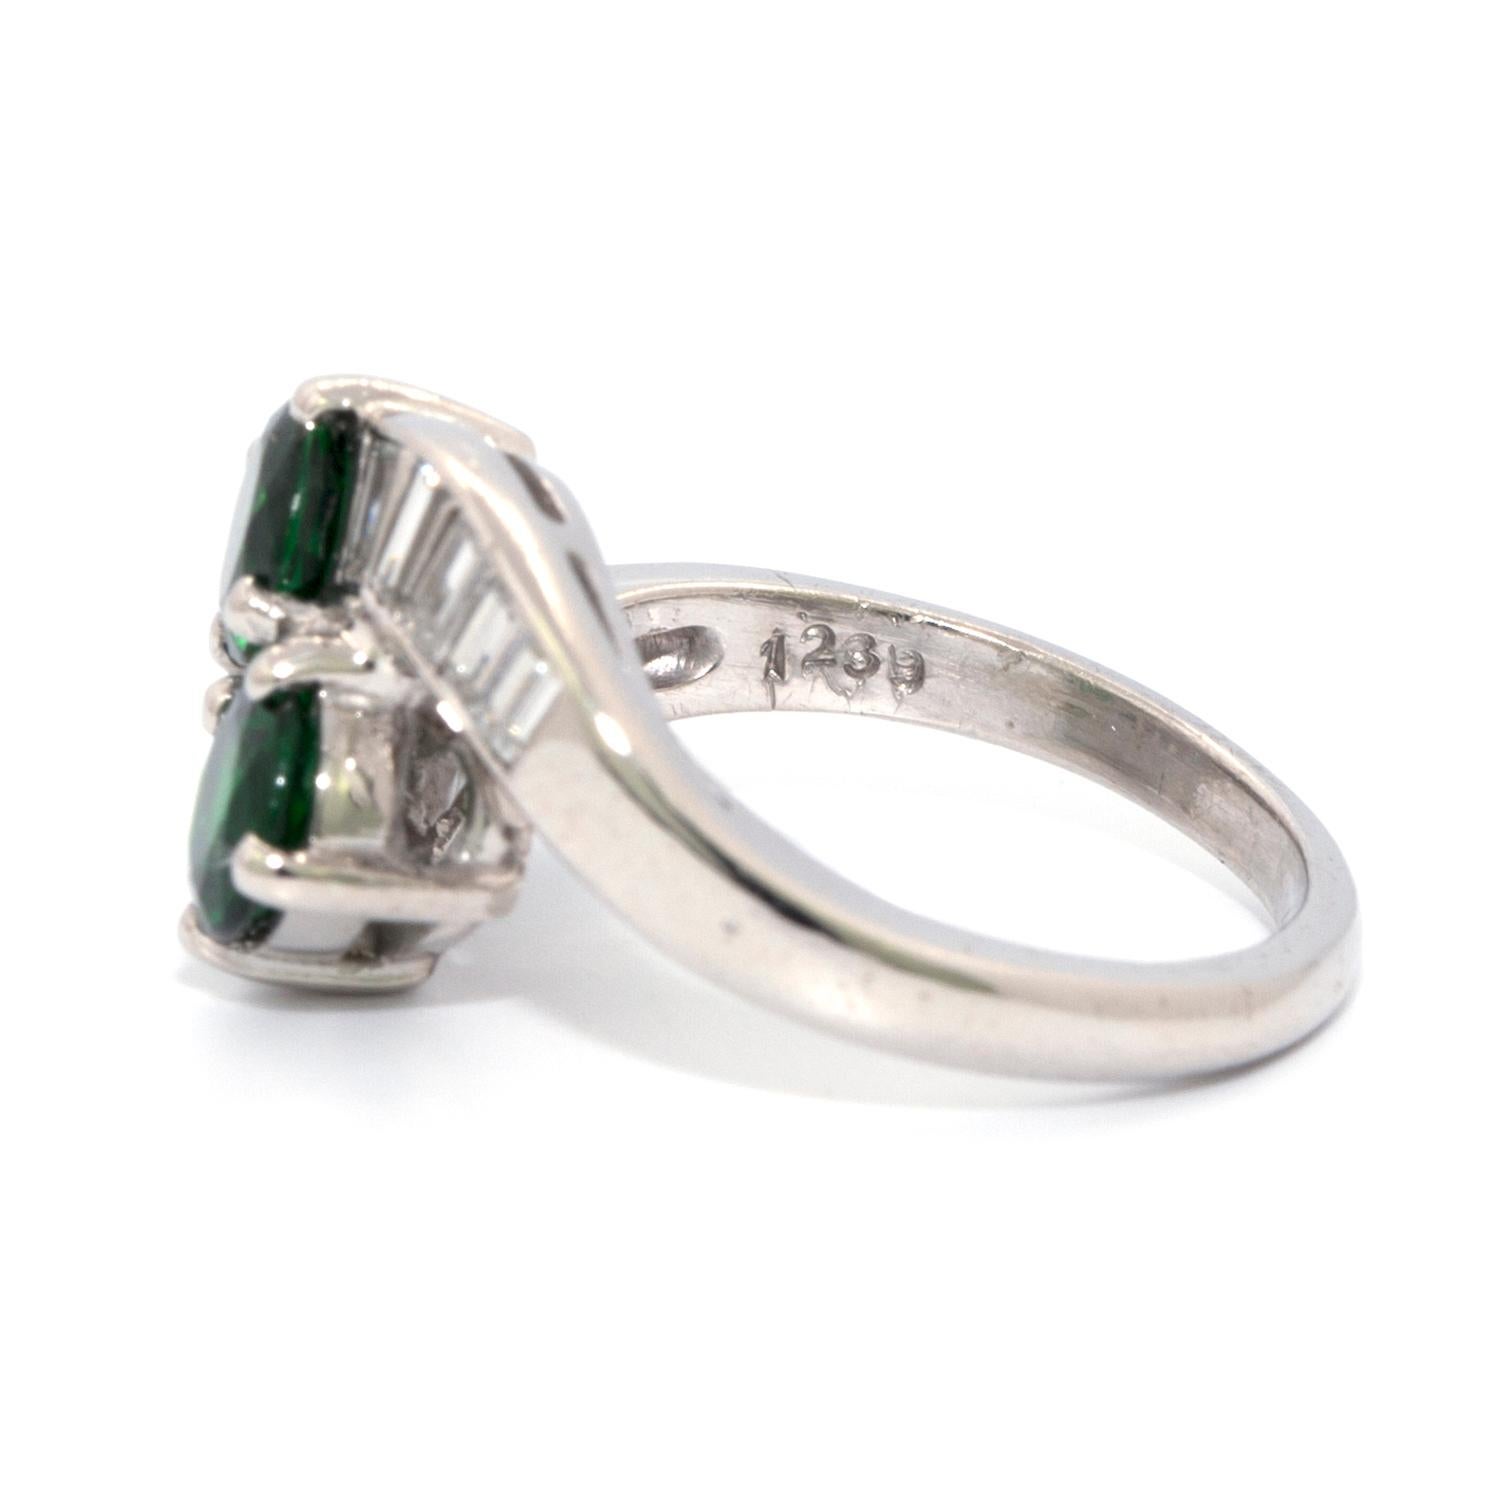 Tsavorite Garnet and Diamond Estate Platinum Ring In Good Condition For Sale In New York, NY